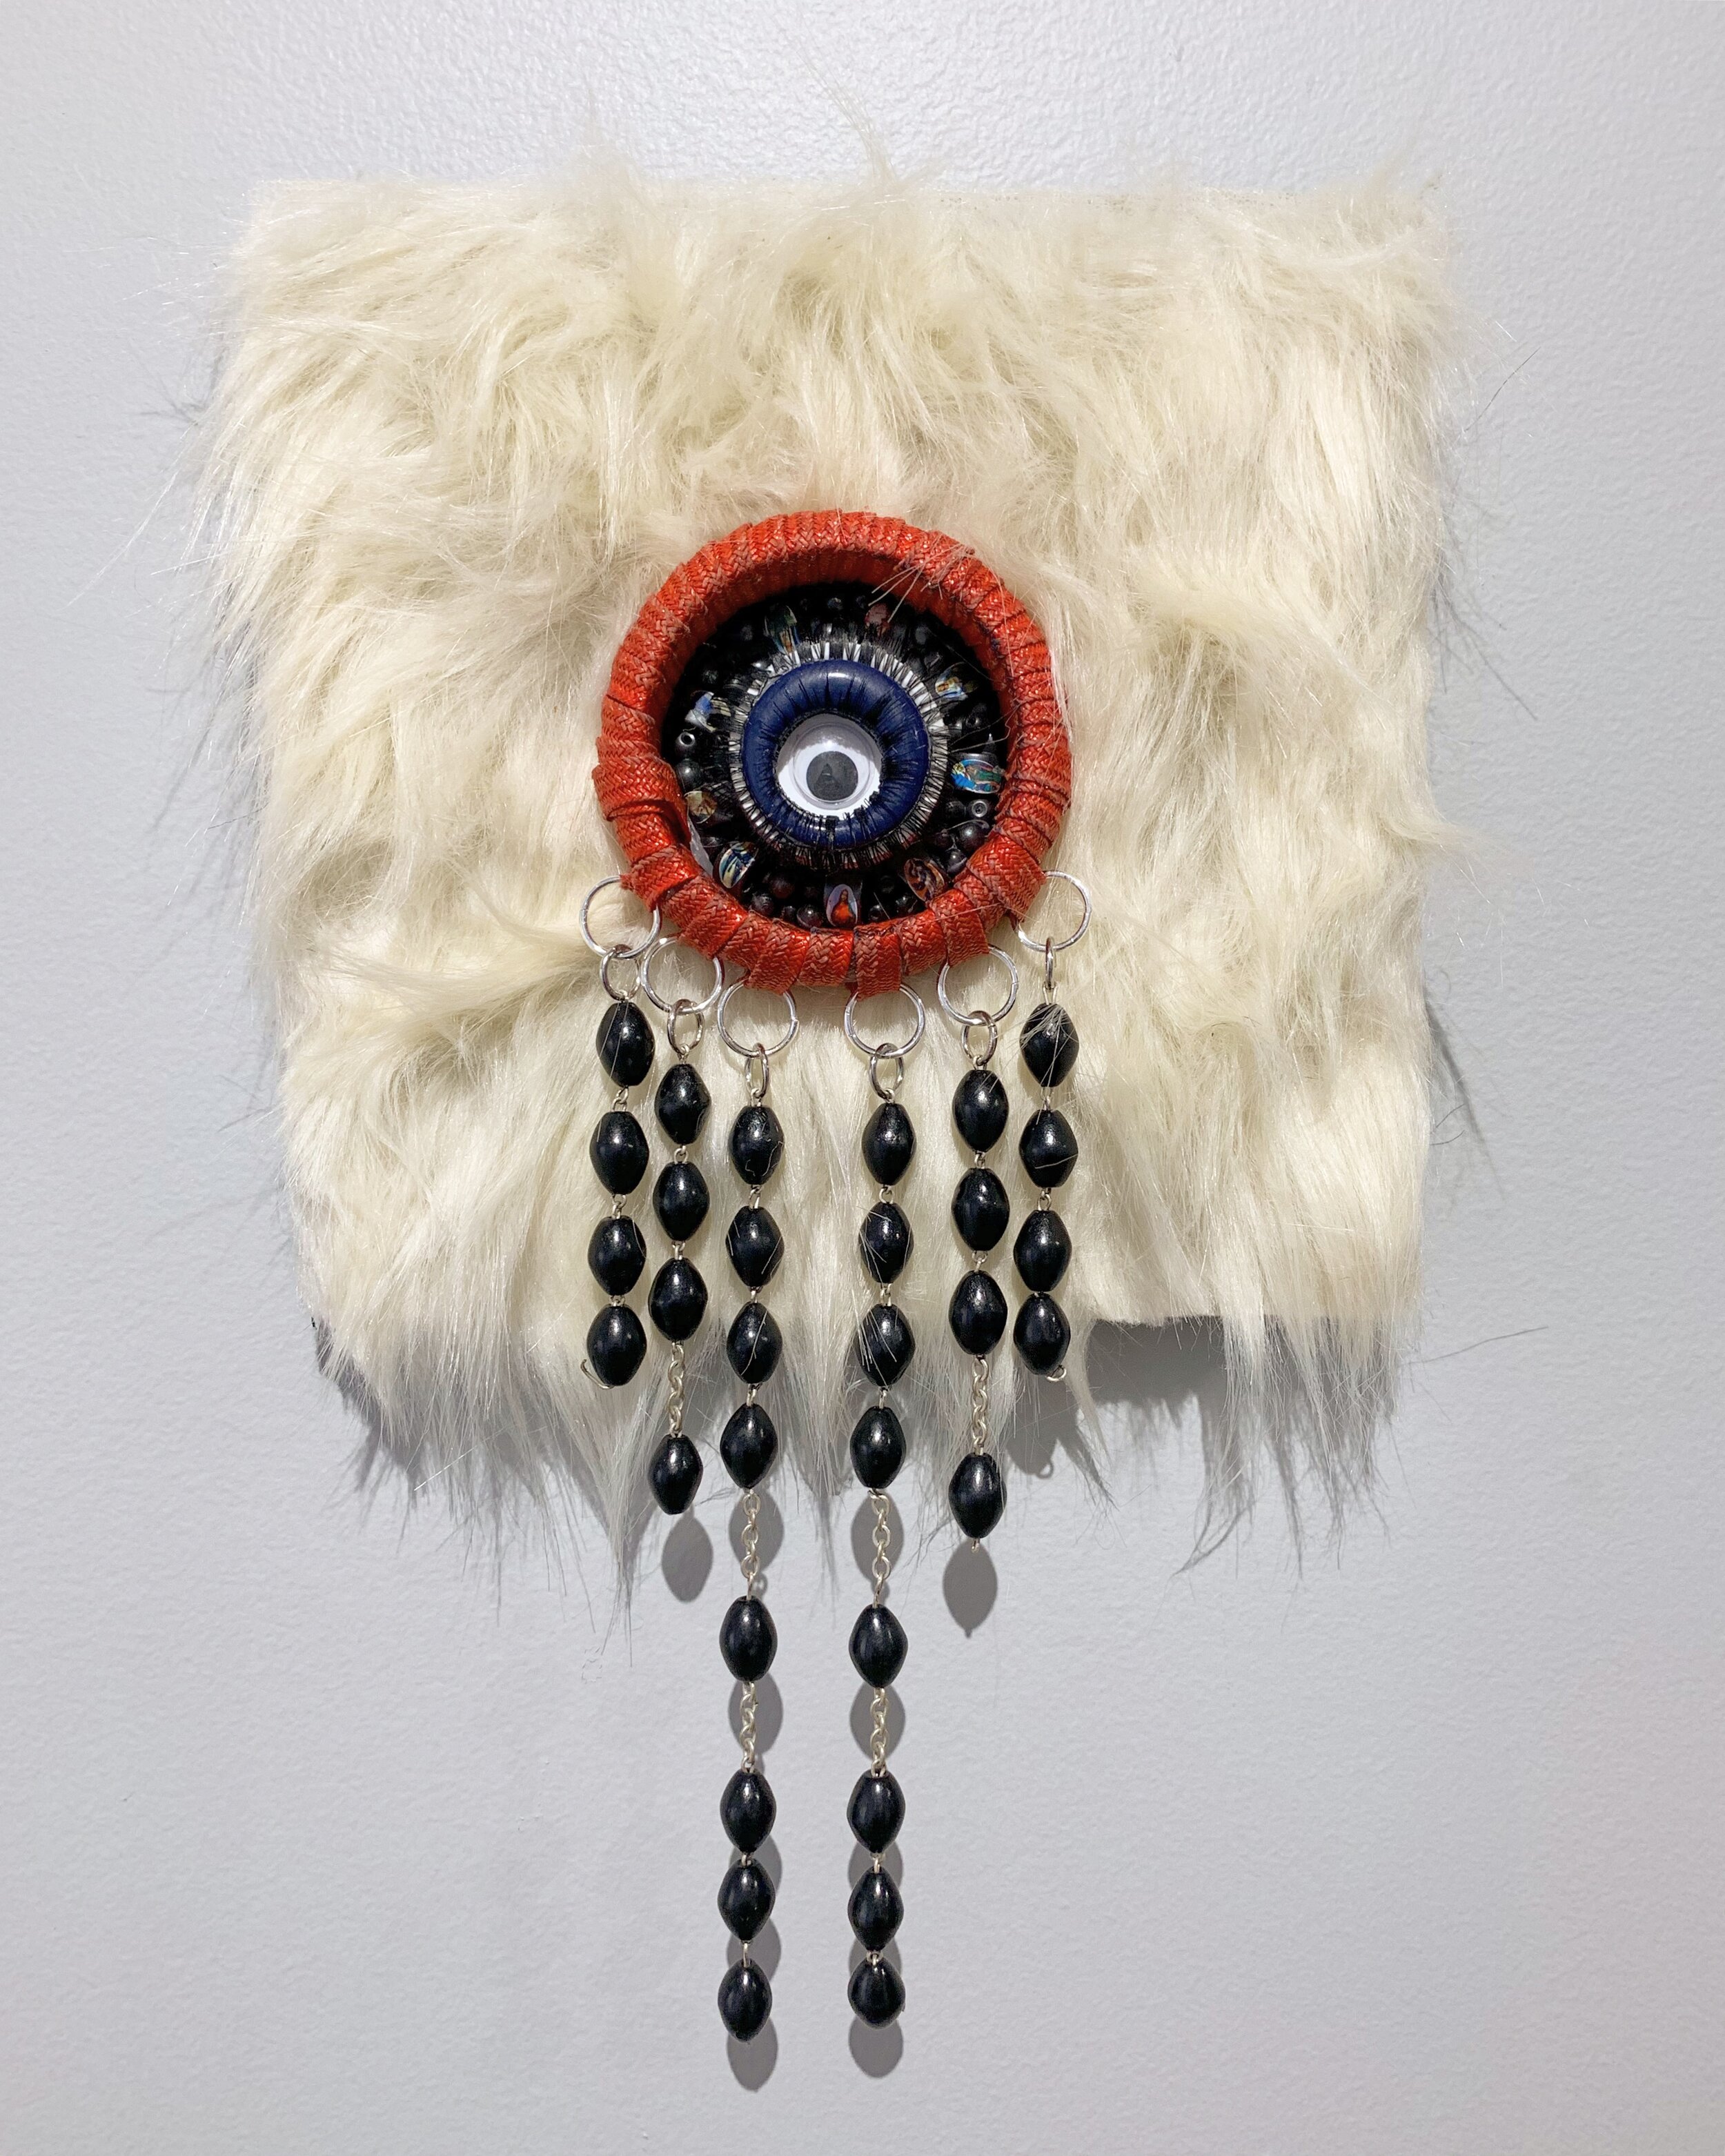   Eye of Providence,  2020, faux fur, costume jewelry, beads, and a googley eye on panel, 8x8” 